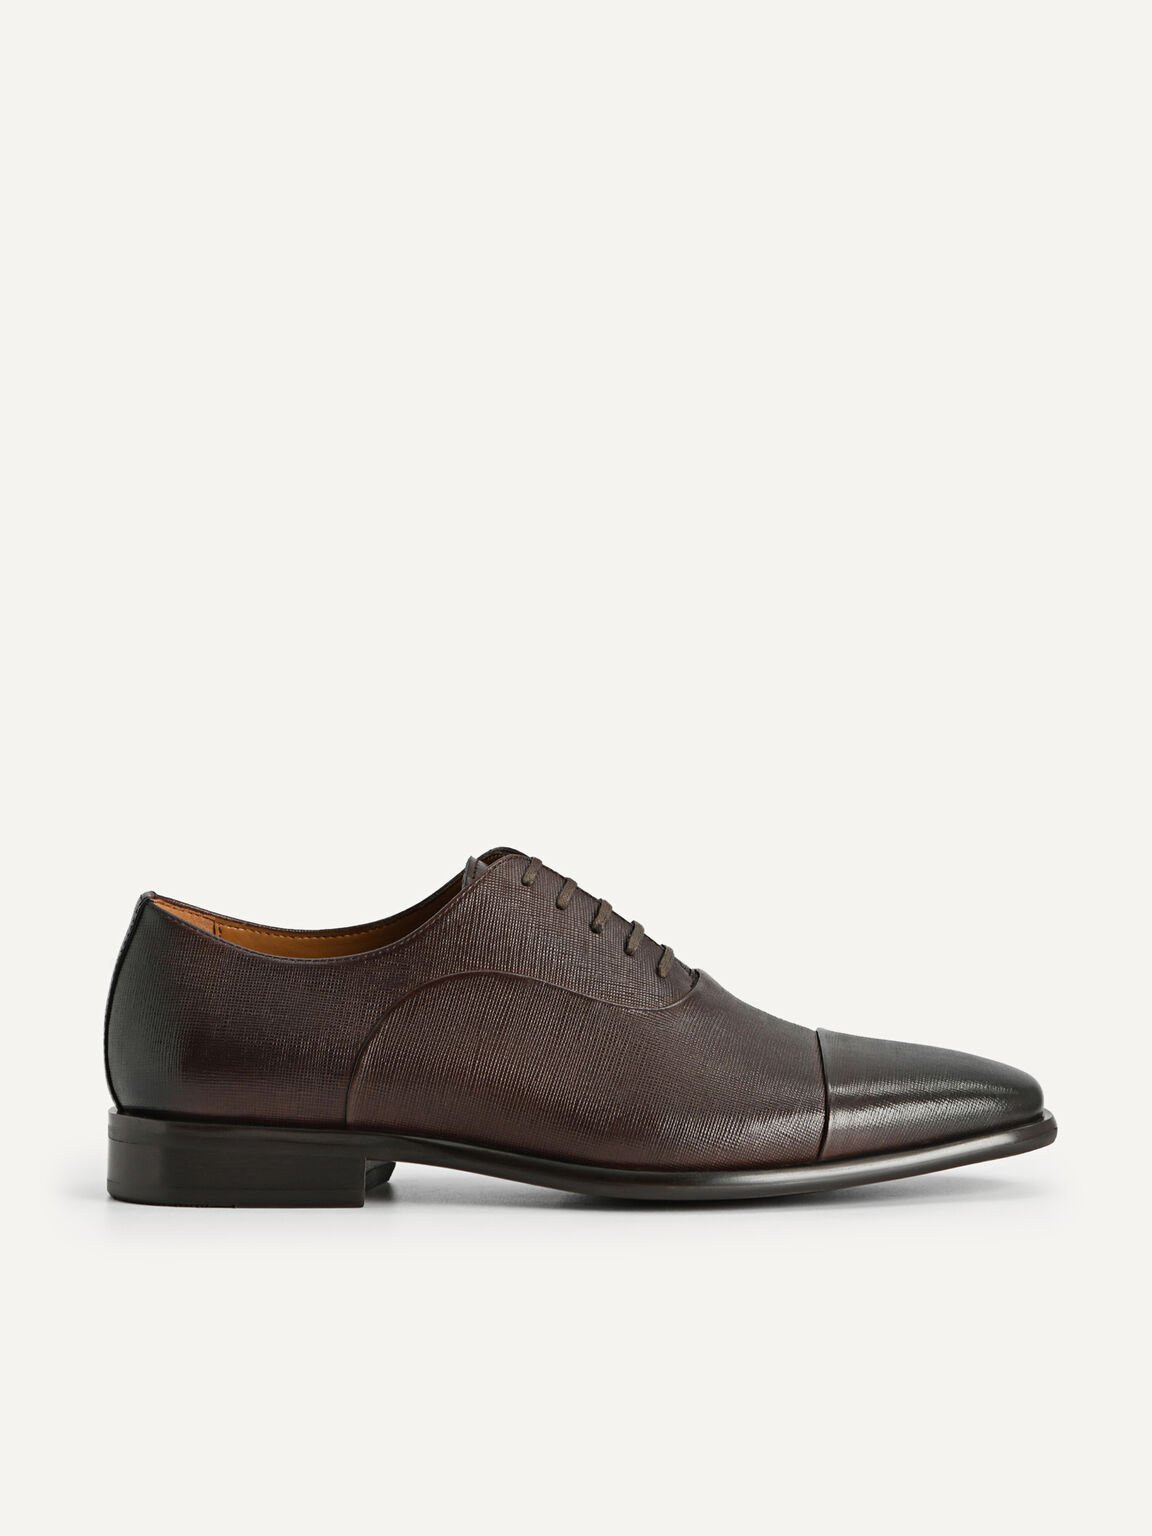 Textured Leather Oxford Shoes, Brown, hi-res